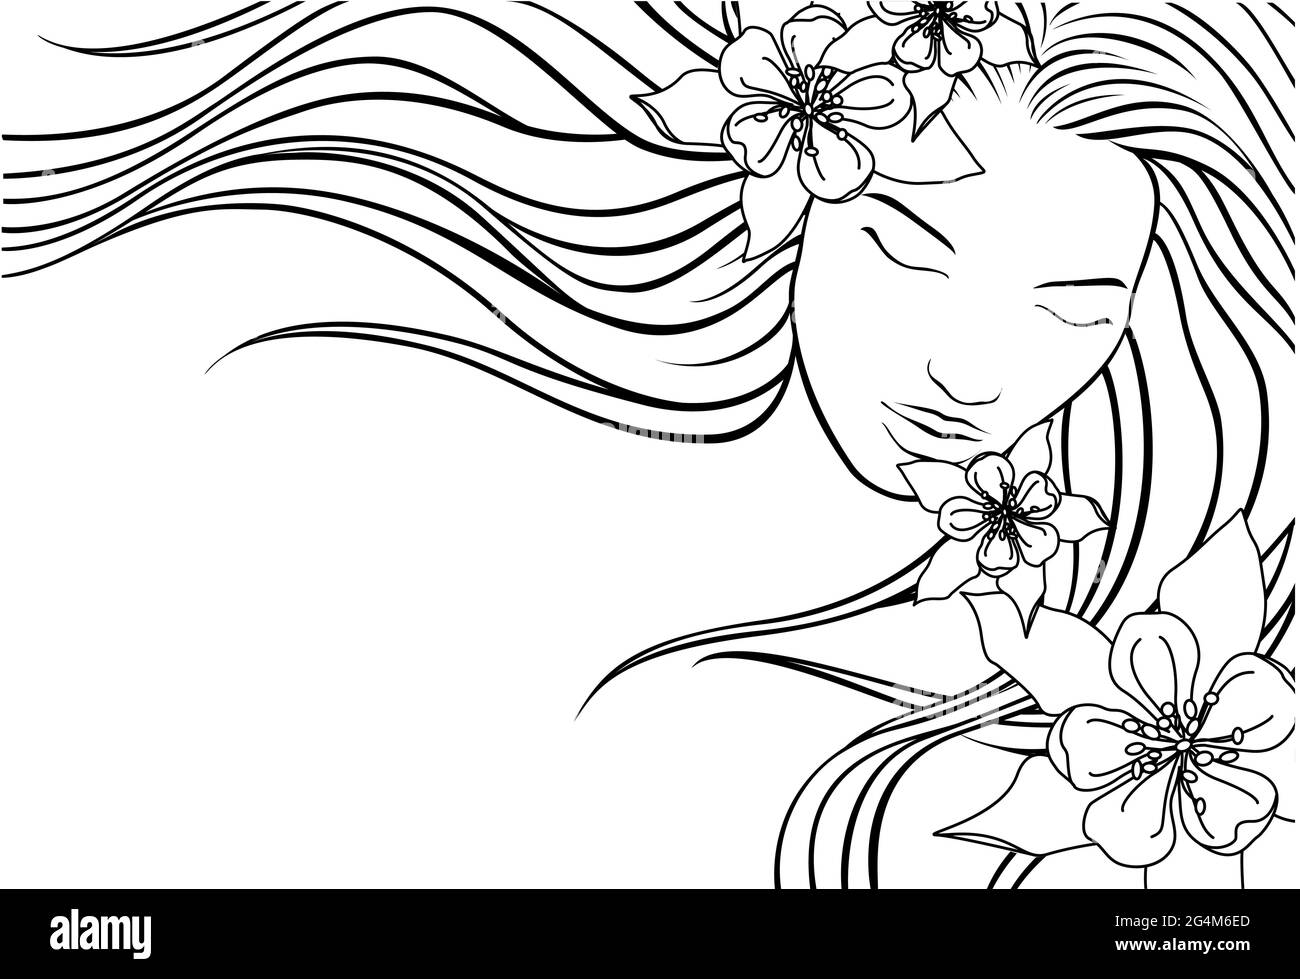 Beautiful young women with long hair and eyes closed ornated with flowers Stock Vector